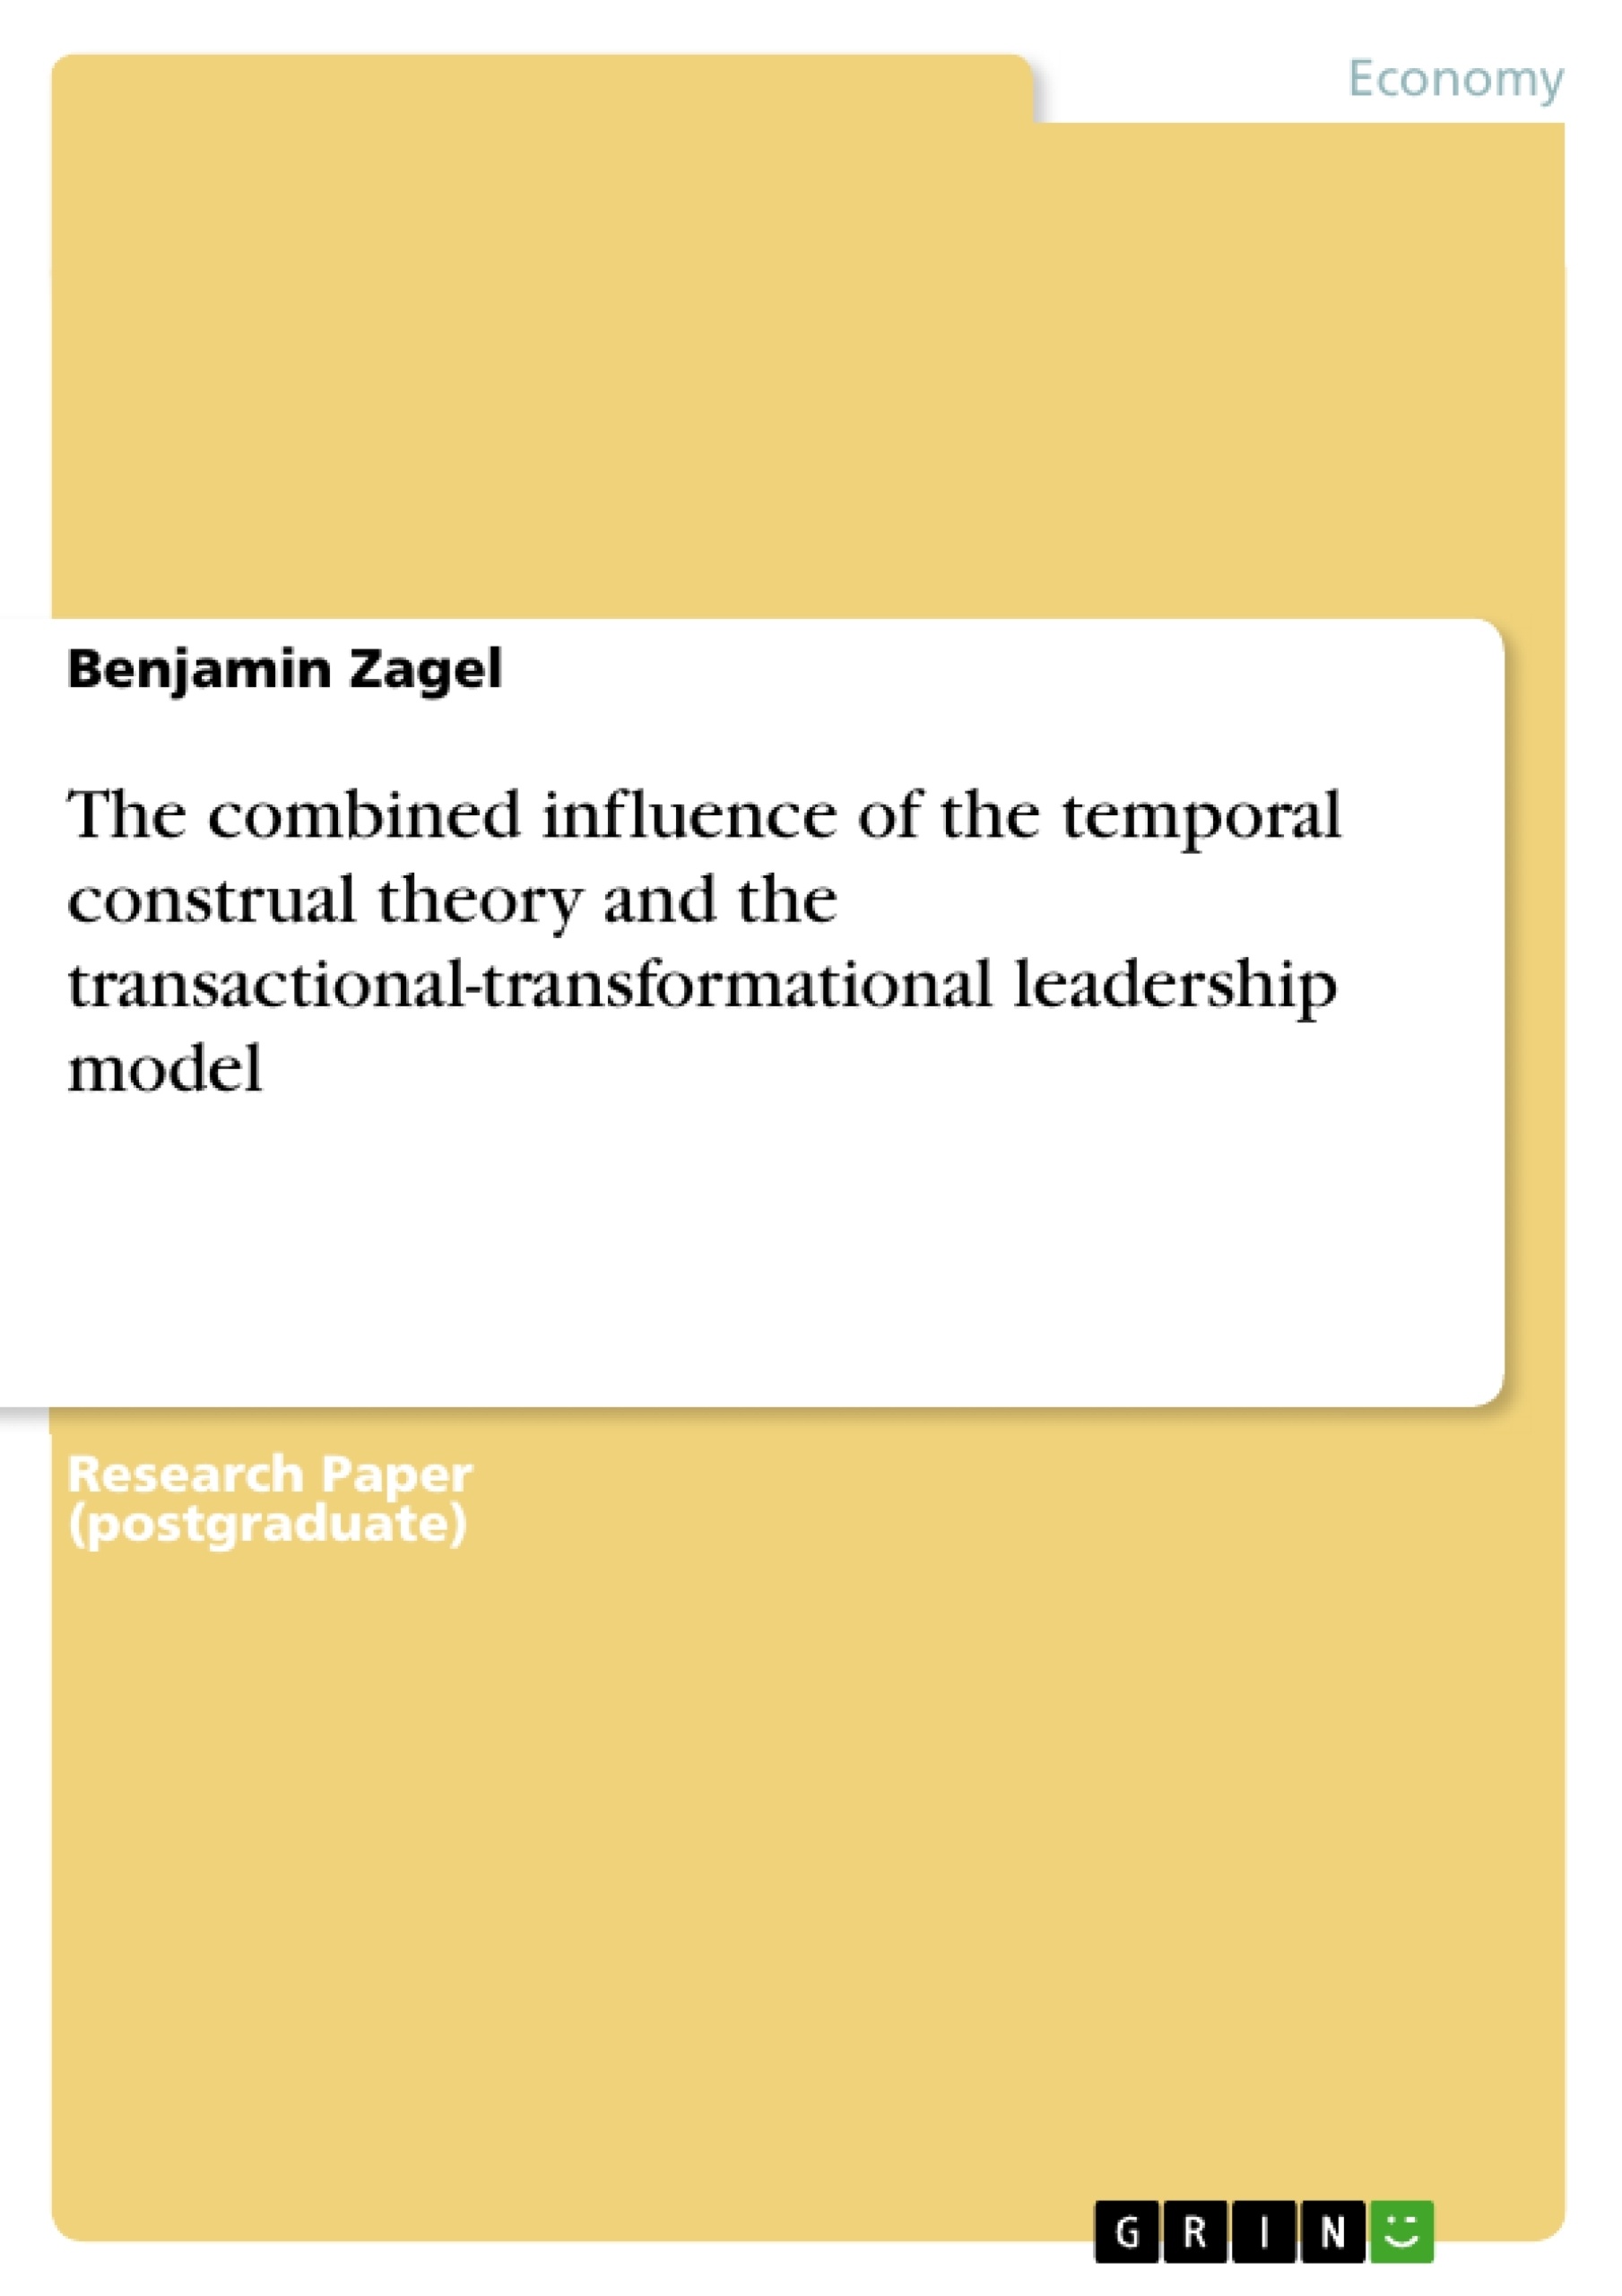 Title: The combined influence of the temporal construal theory and the transactional-transformational leadership model